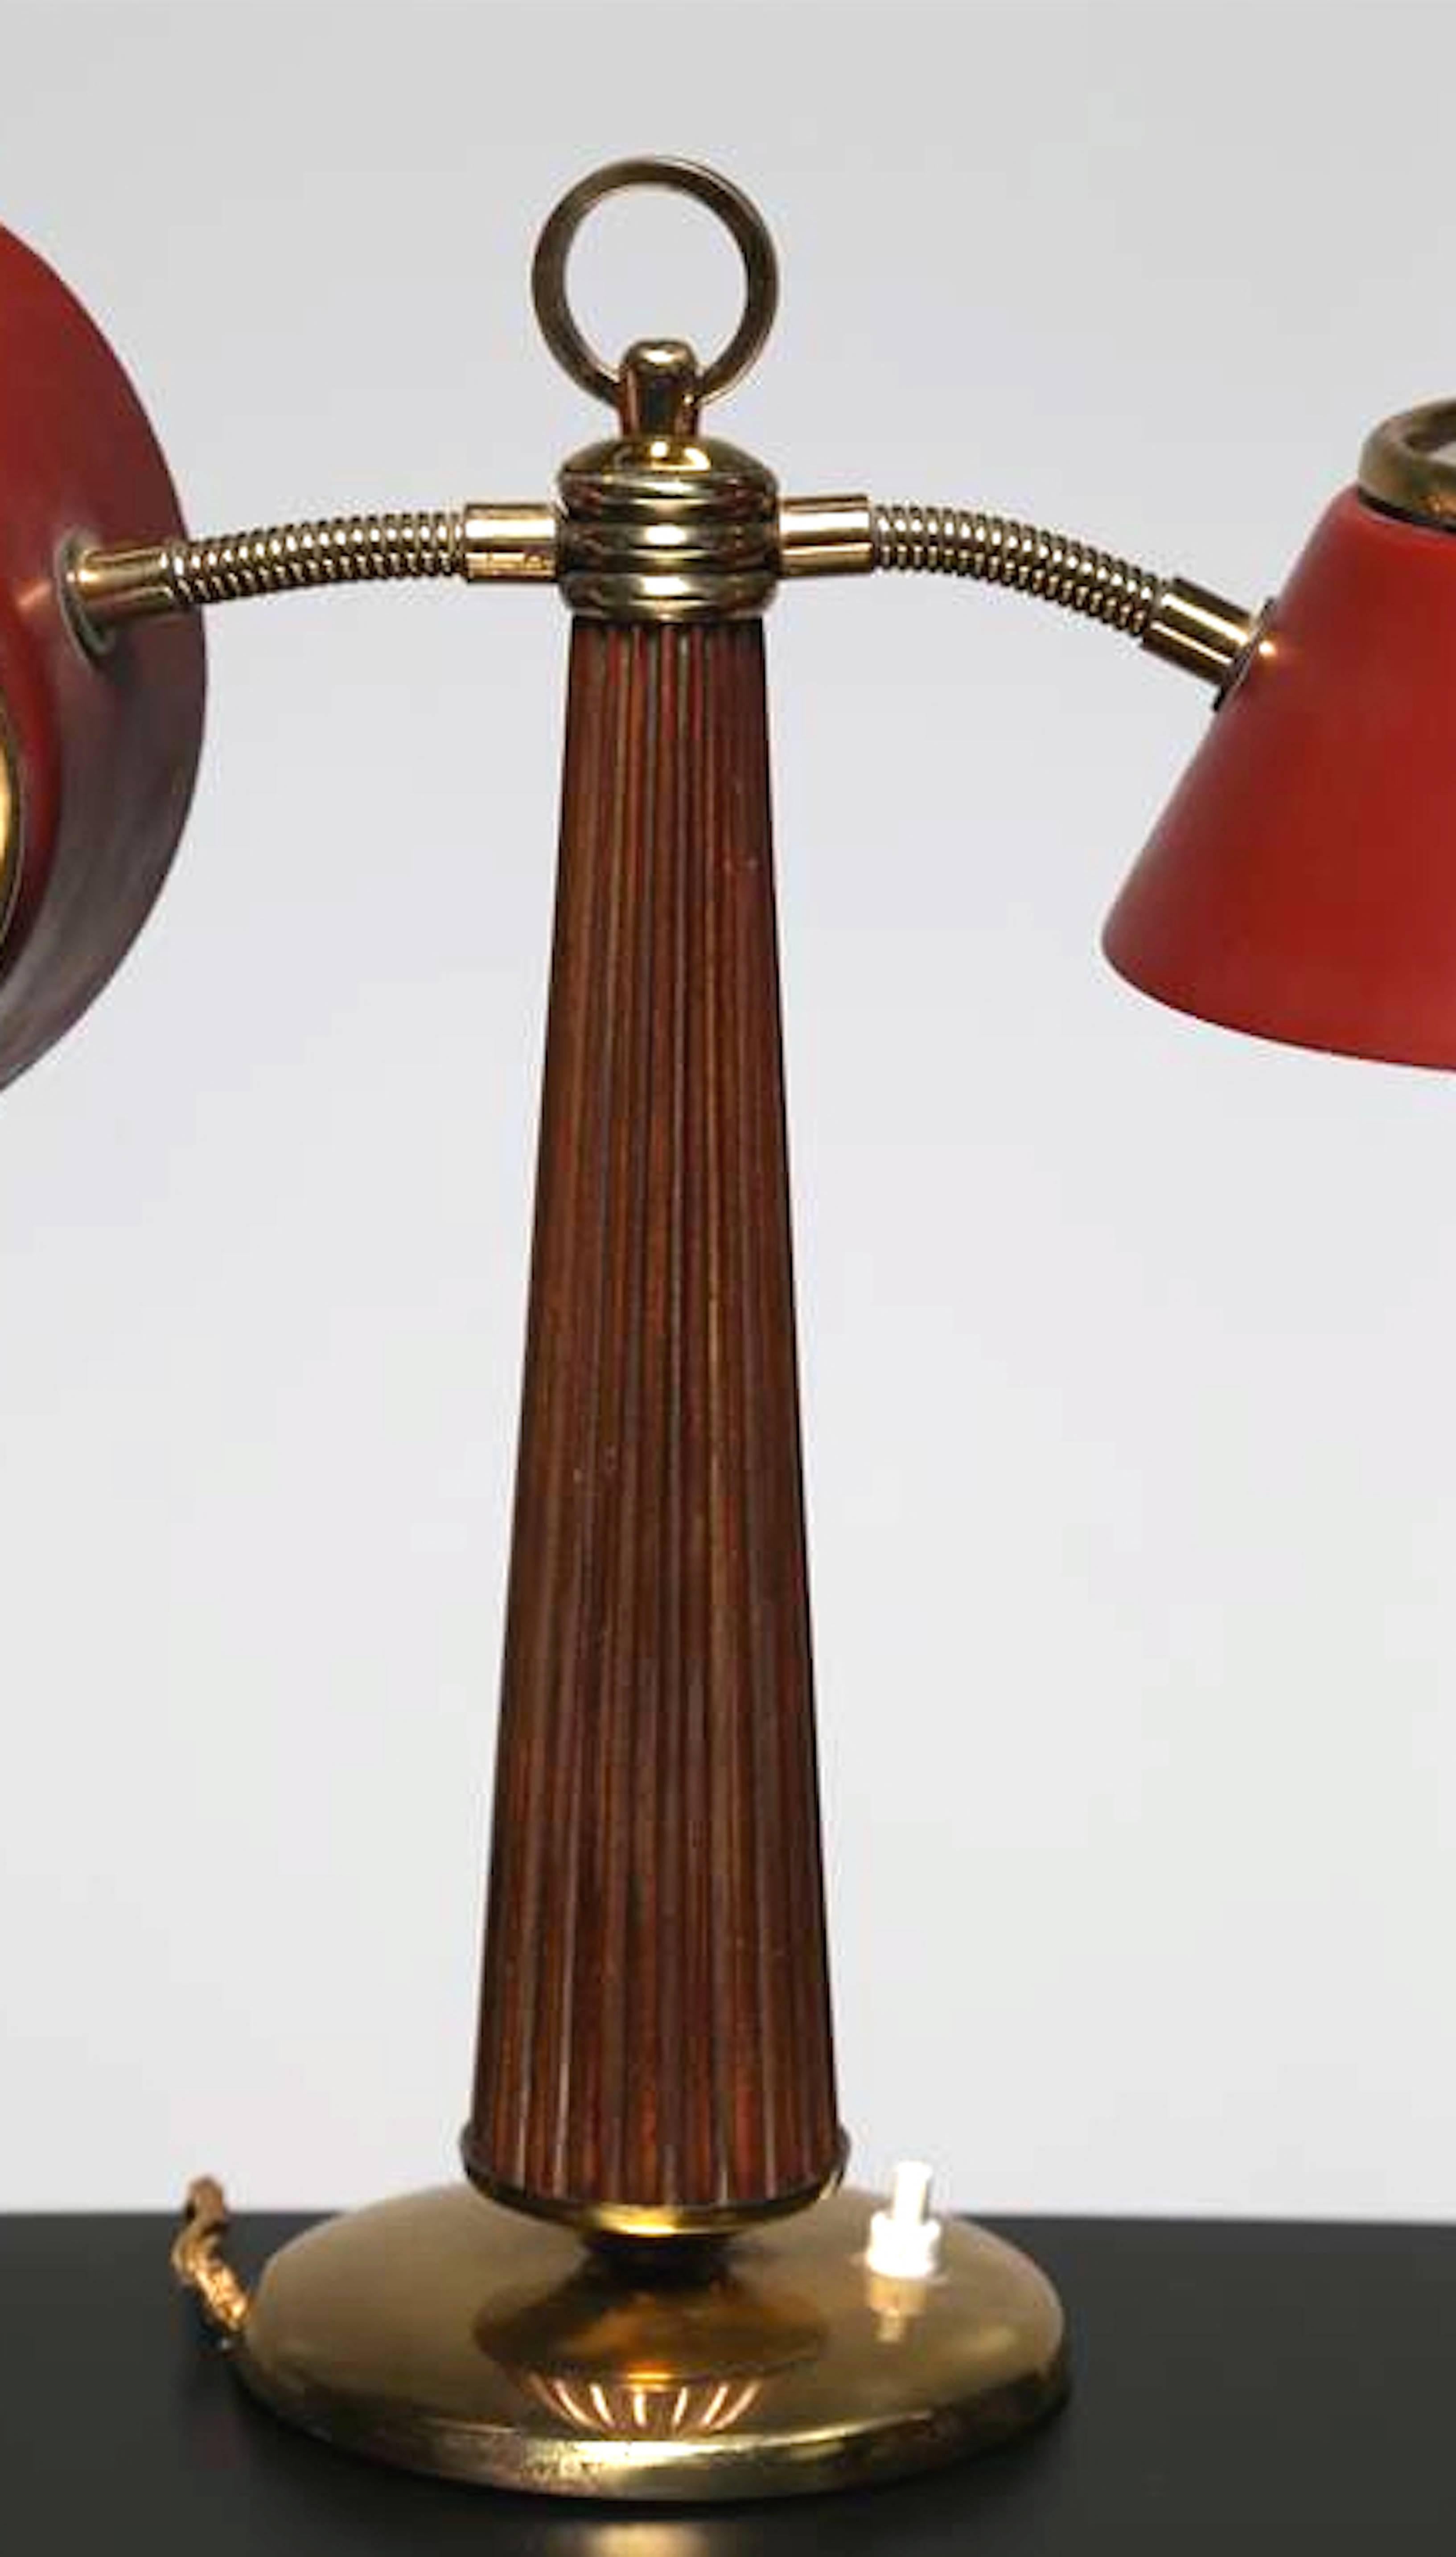 A very rare table lamp attributed to Arredoluce in 1950. Brass, lacquered metal, wood and satinated glass. Red adjustable shades.Free professional packing and shipping is provided.